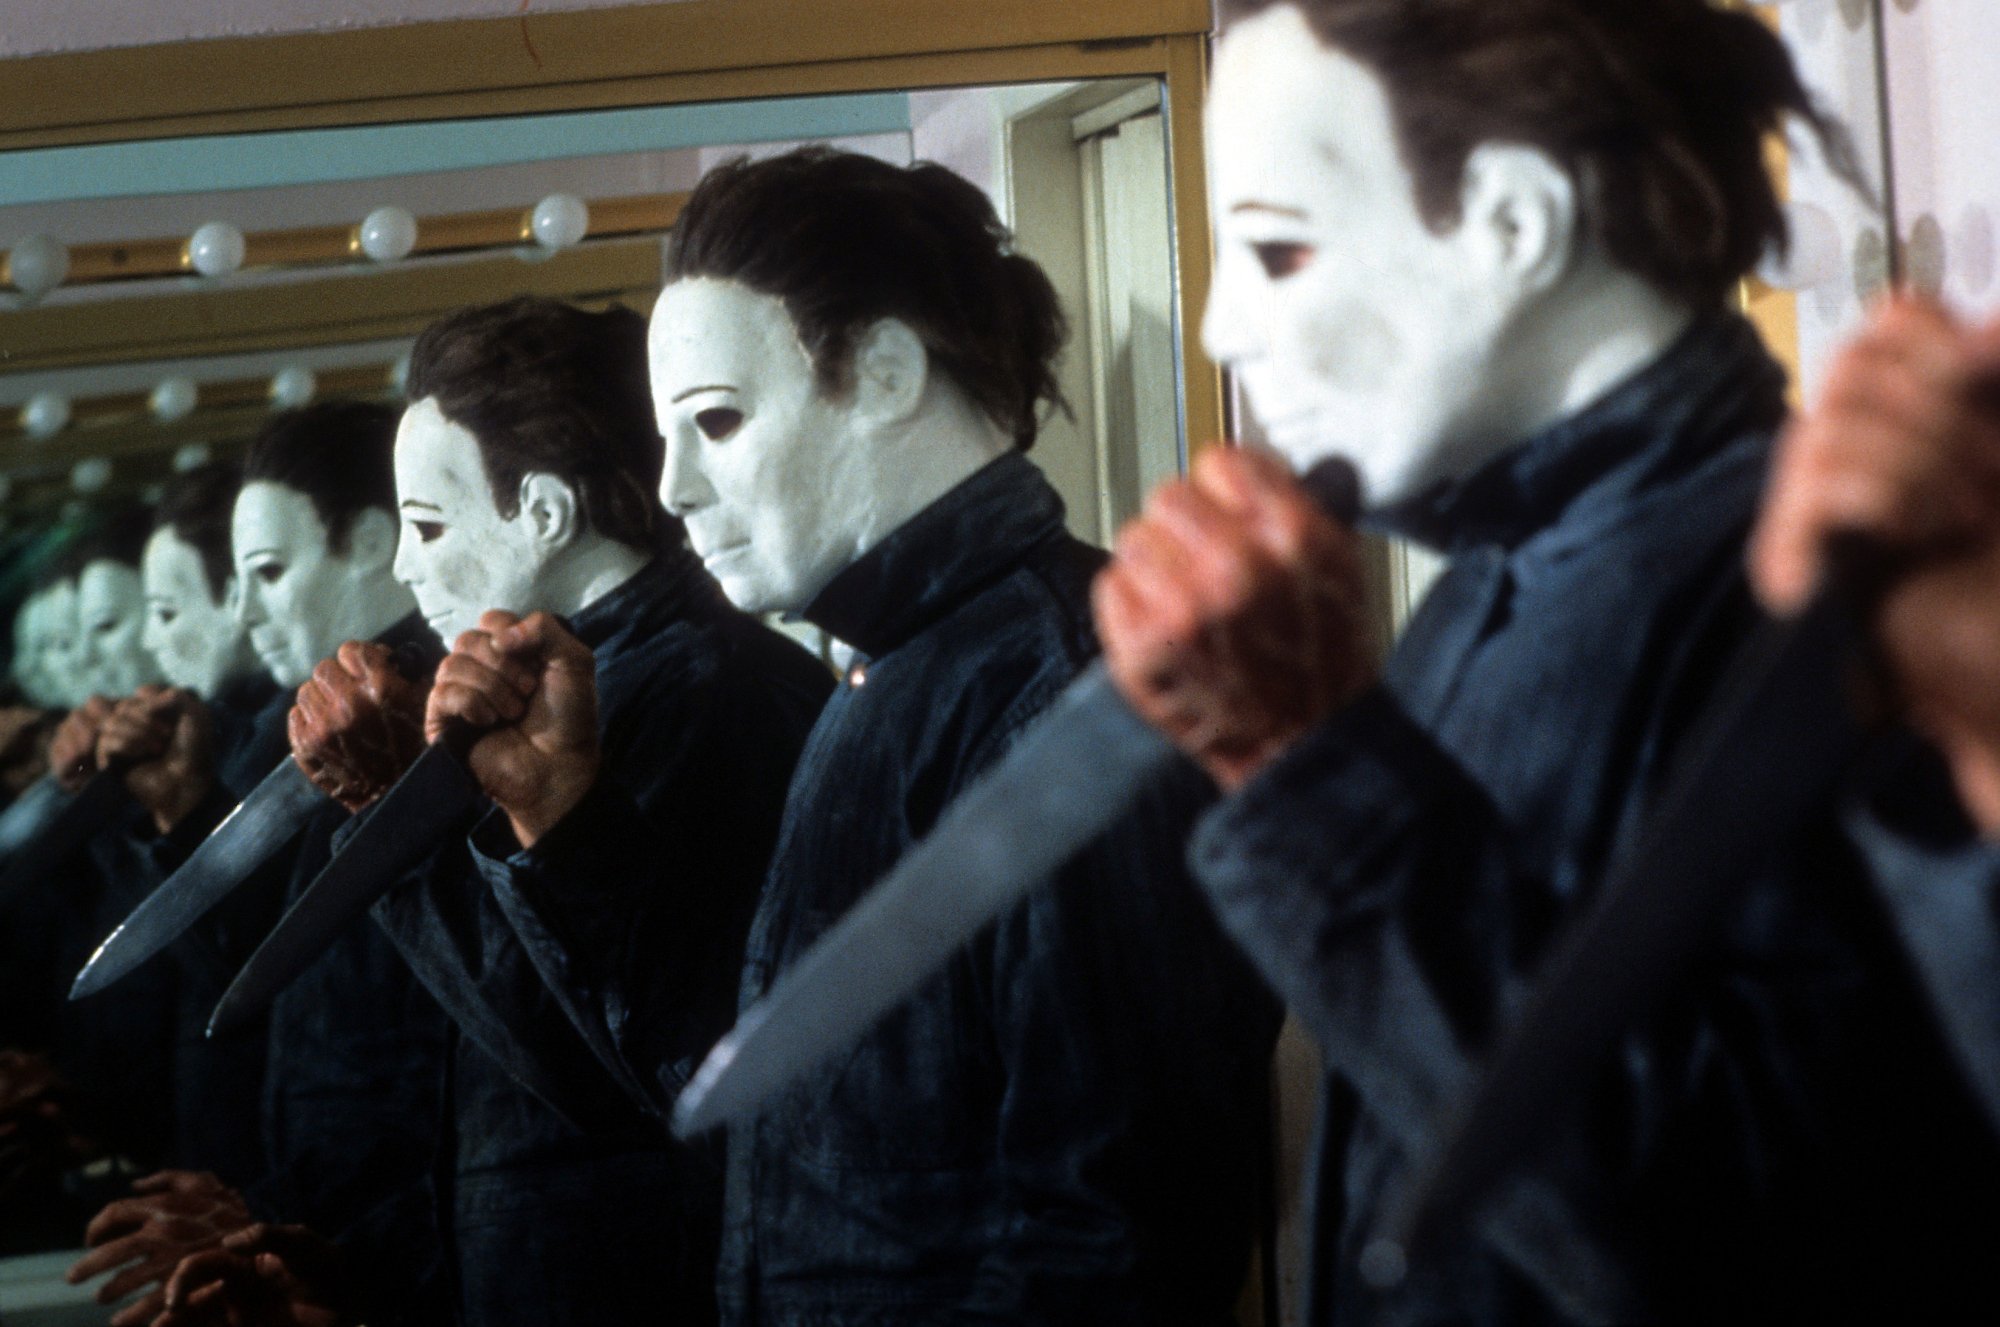 'Halloween 4: The Return of Michael Myers' George P. Wilbur as Michael Myers in mirror holding a knife